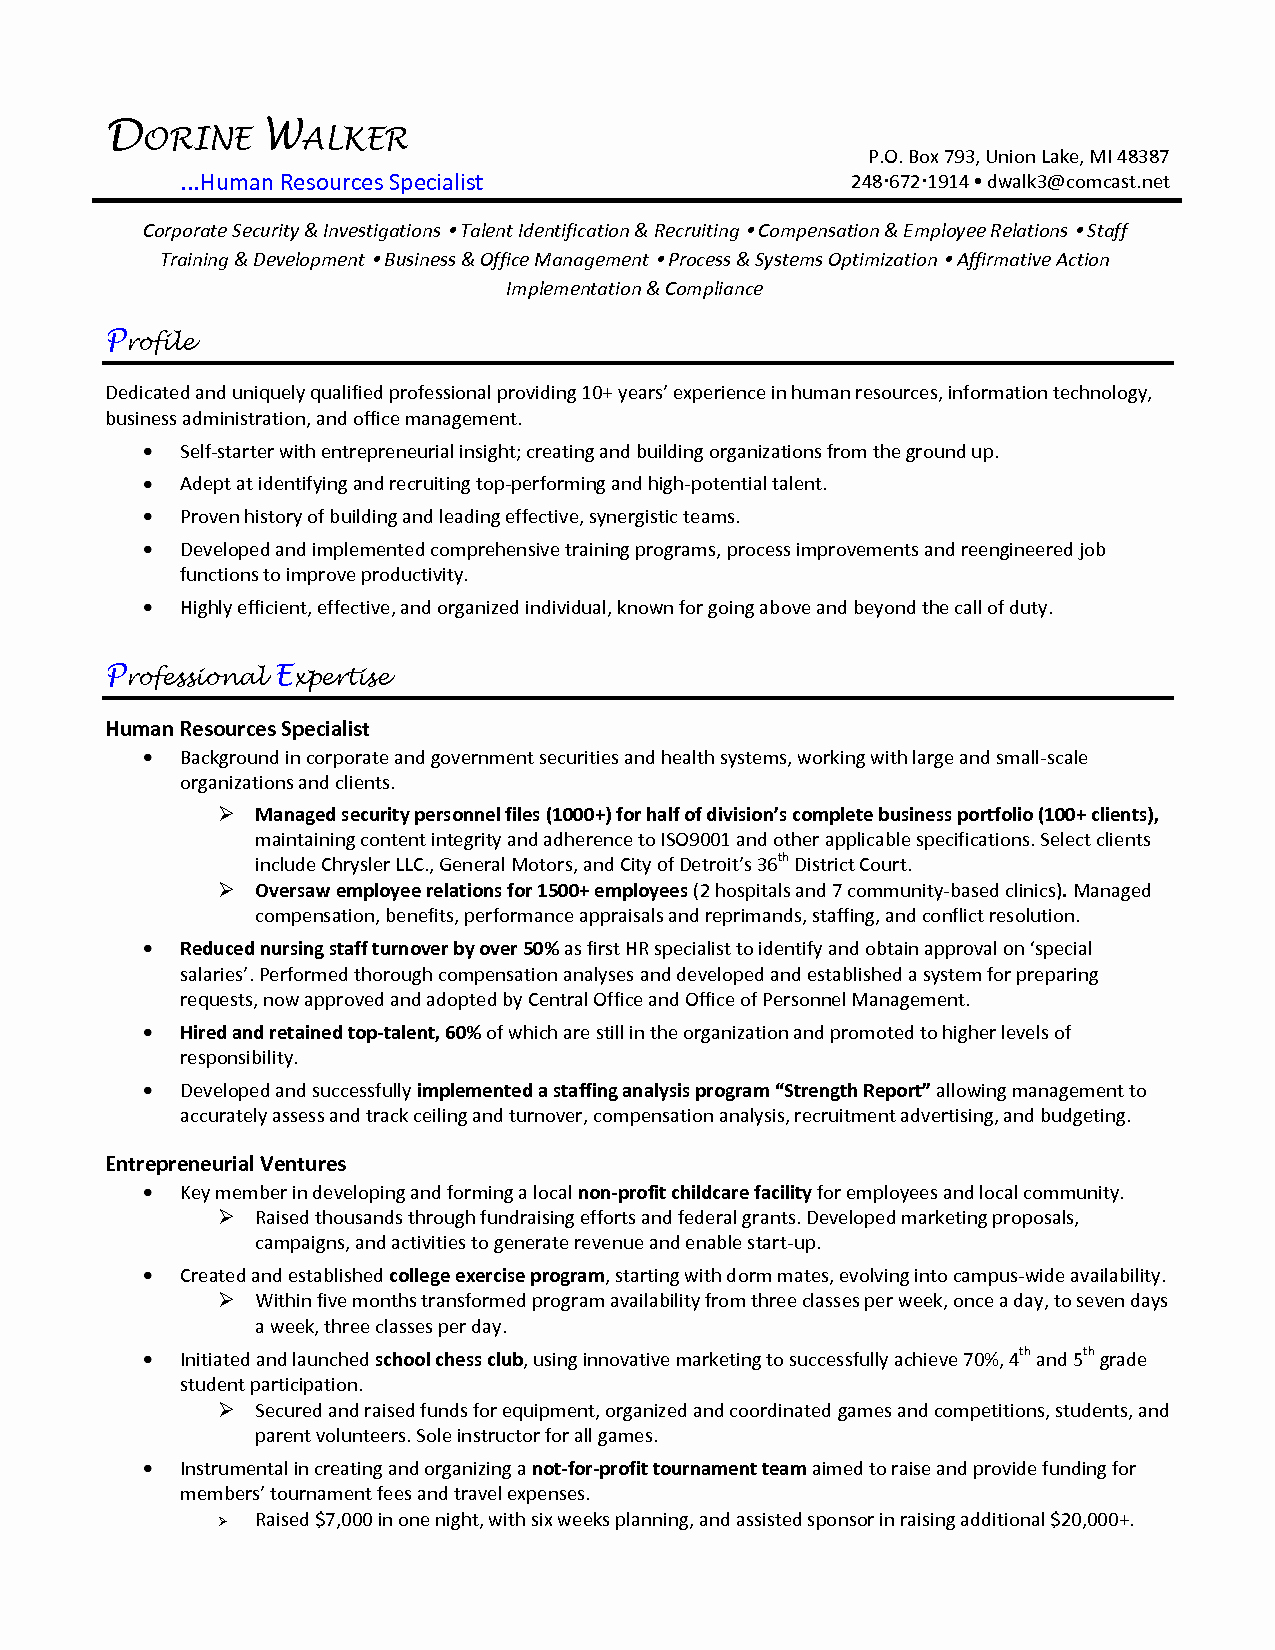 Resume Examples Human Resources Manager Payroll Specialist